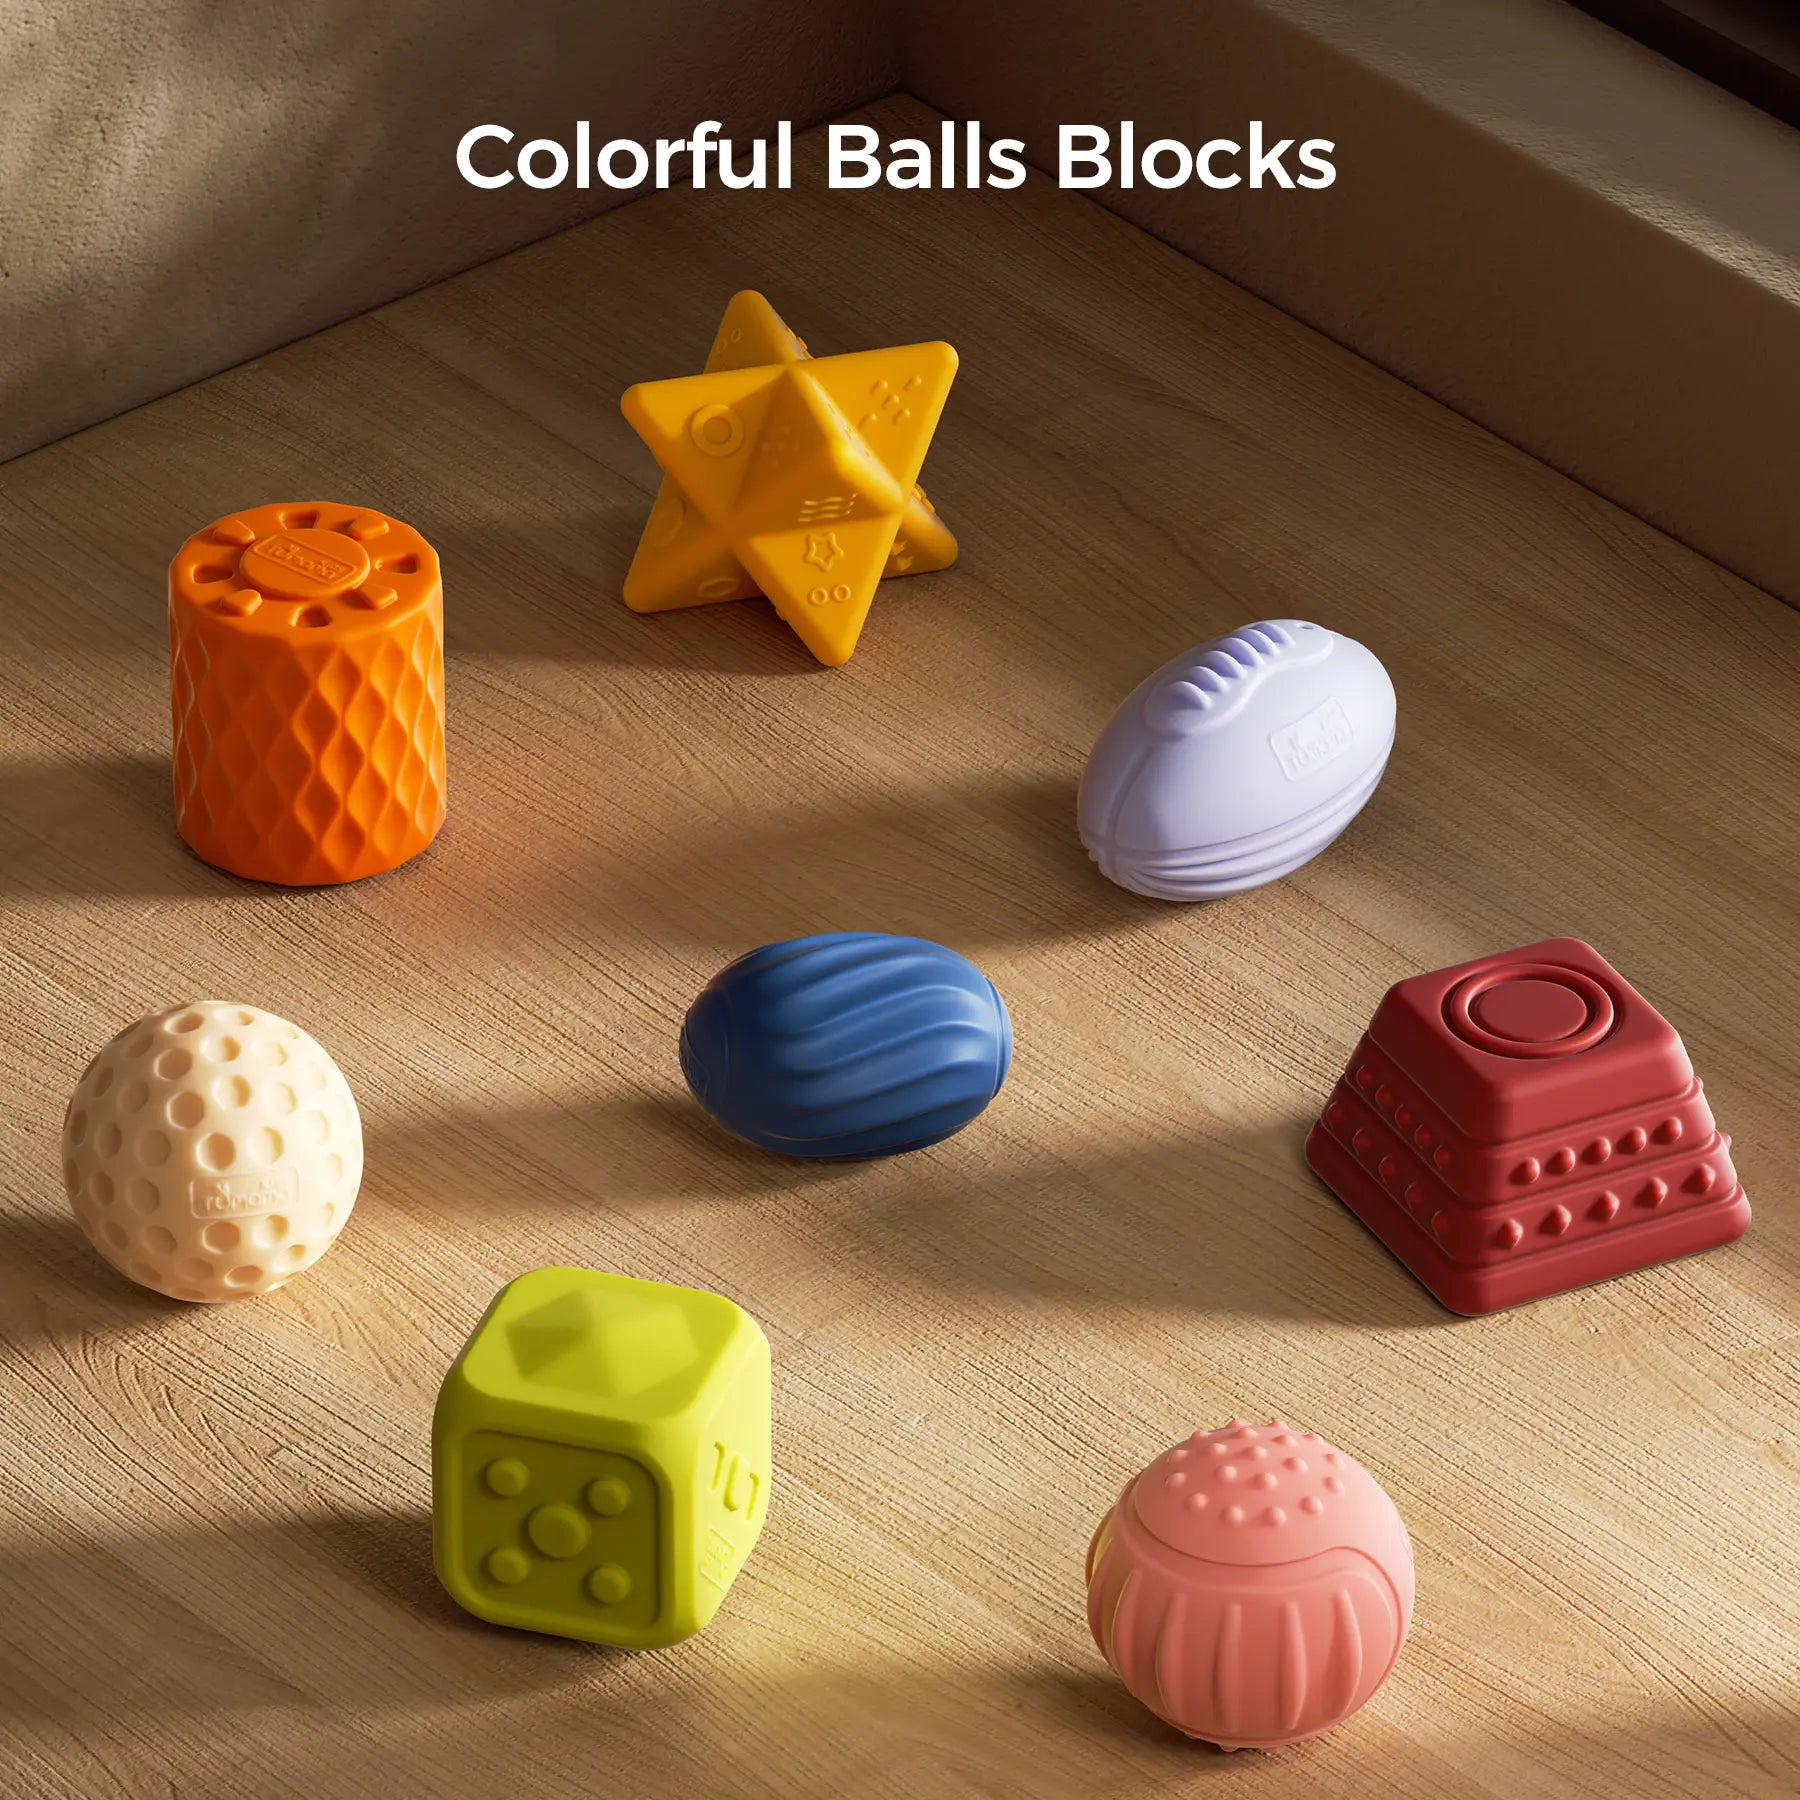 Soft block stacking balls for baby's sensory exploration